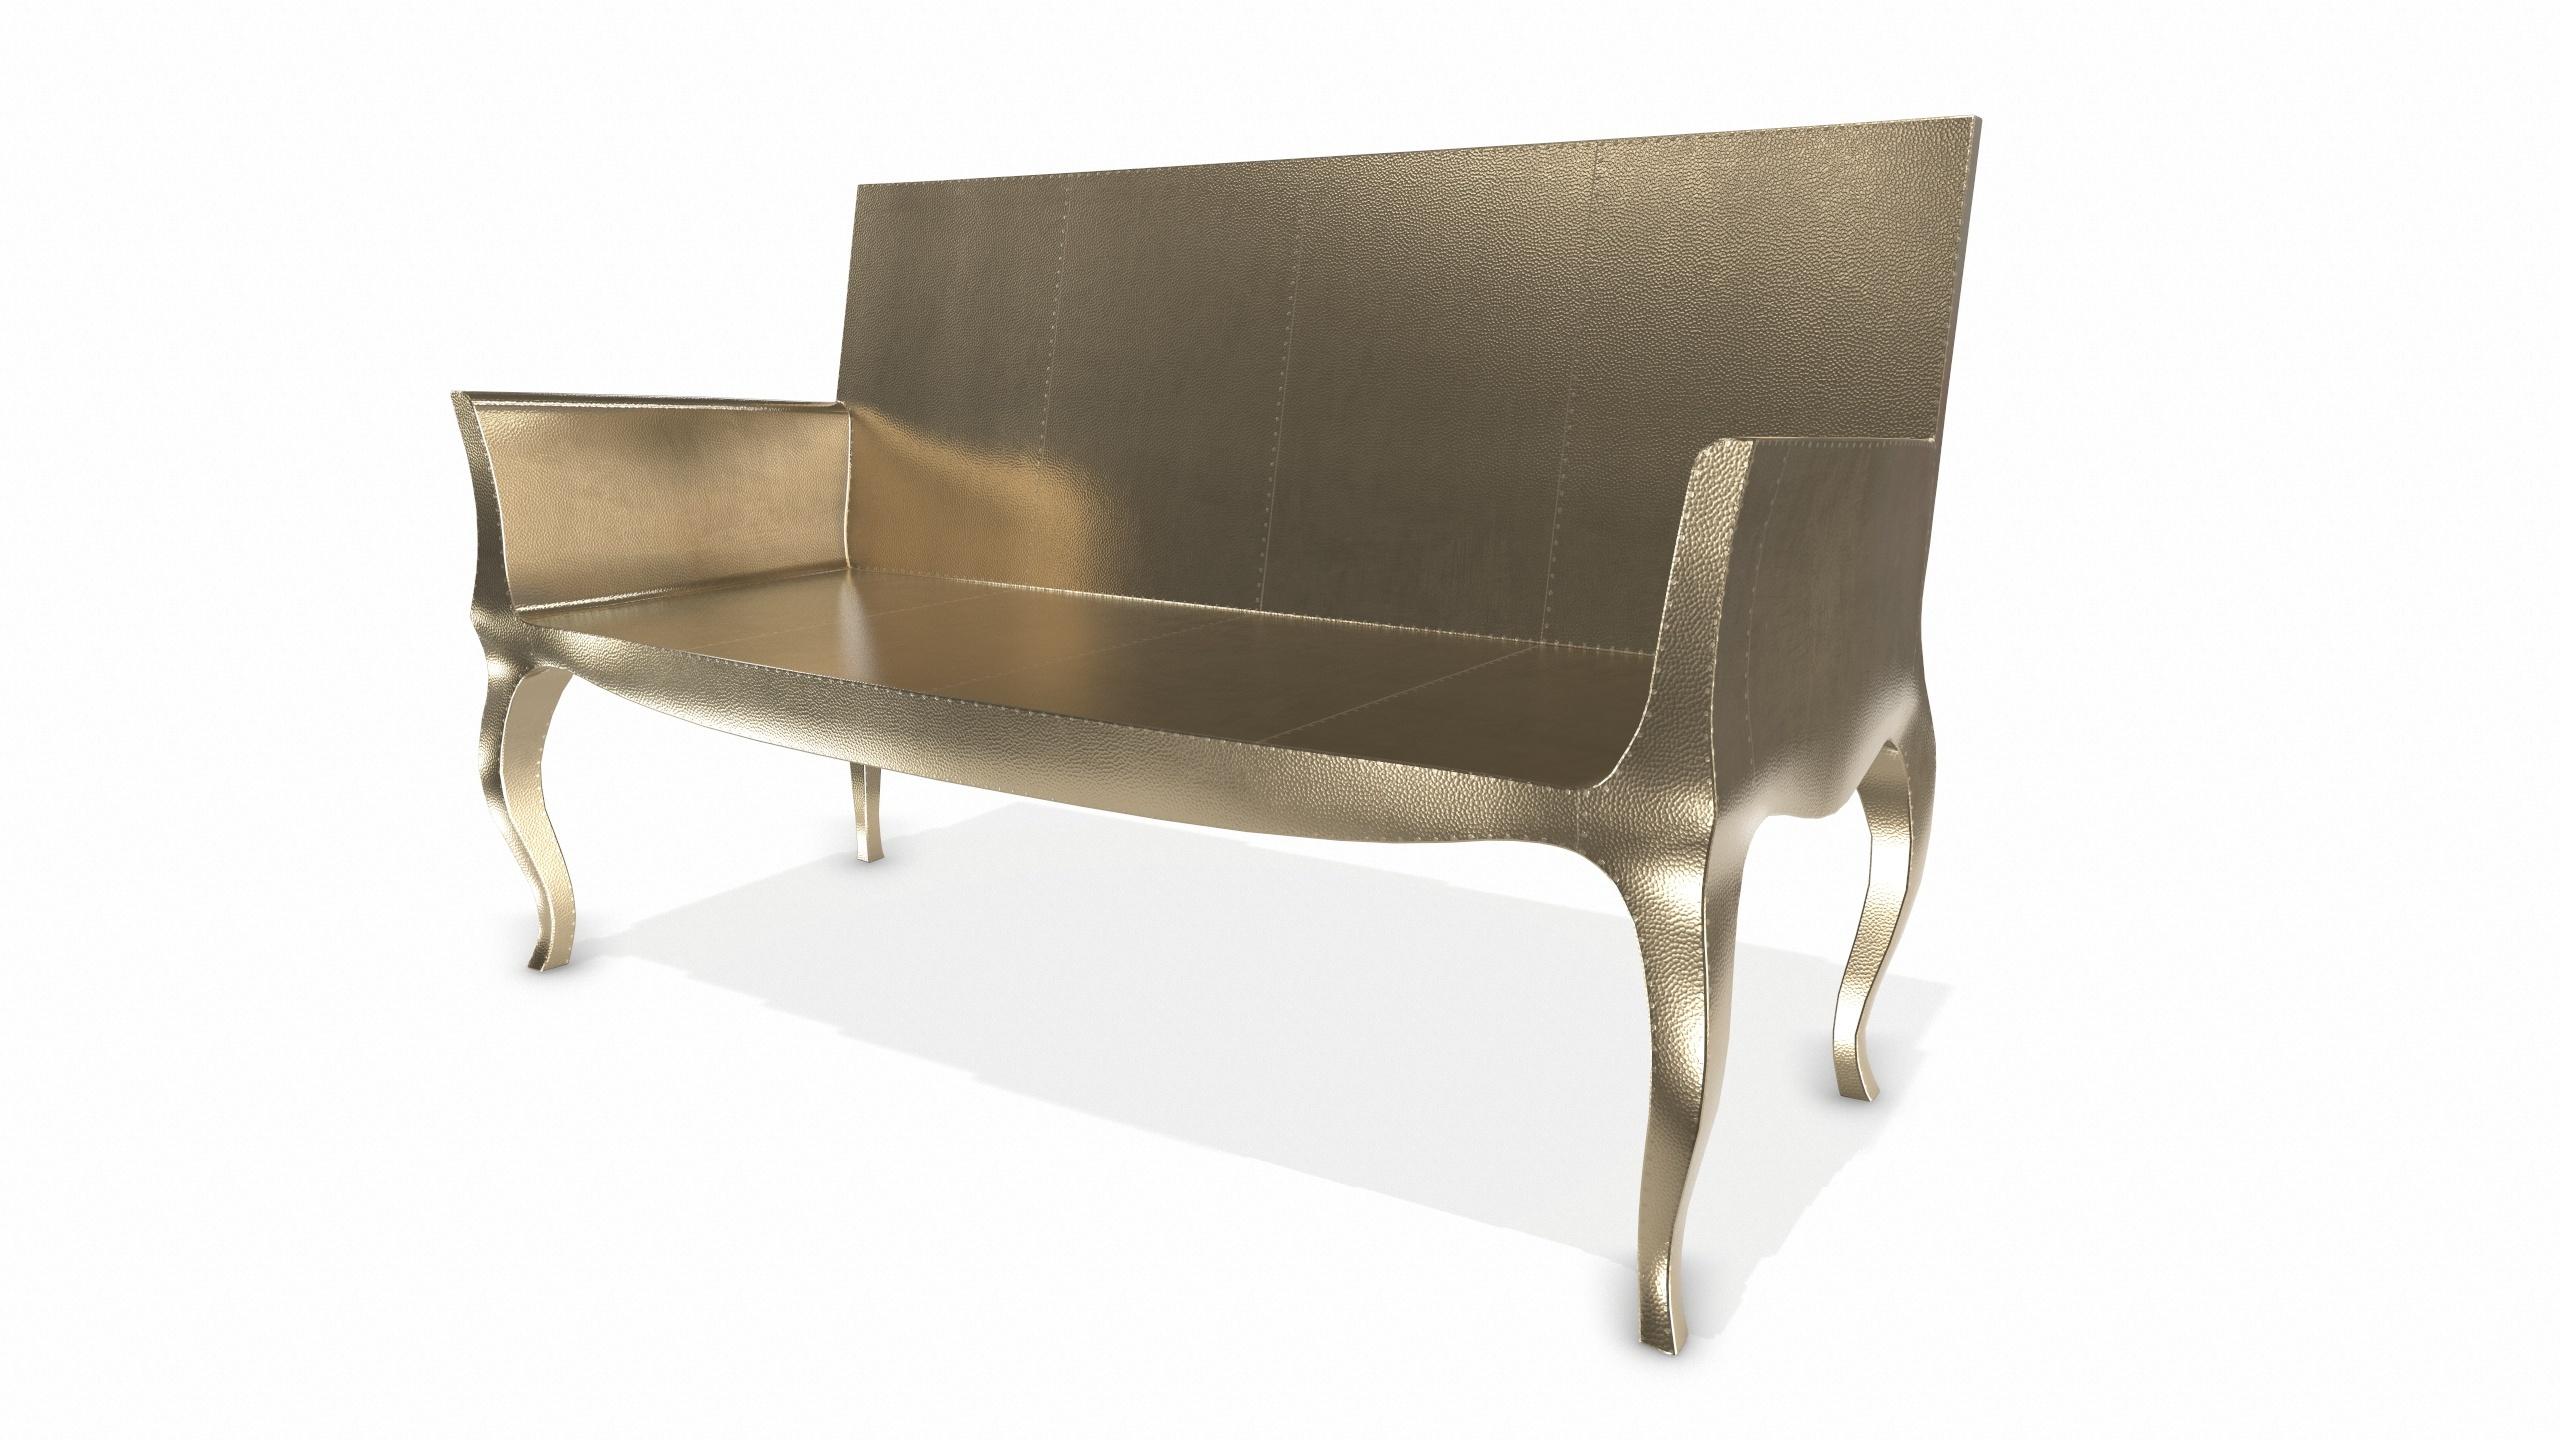 American Louise Settee Art Deco Benches in Mid. Hammered Brass by Paul Mathieu For Sale